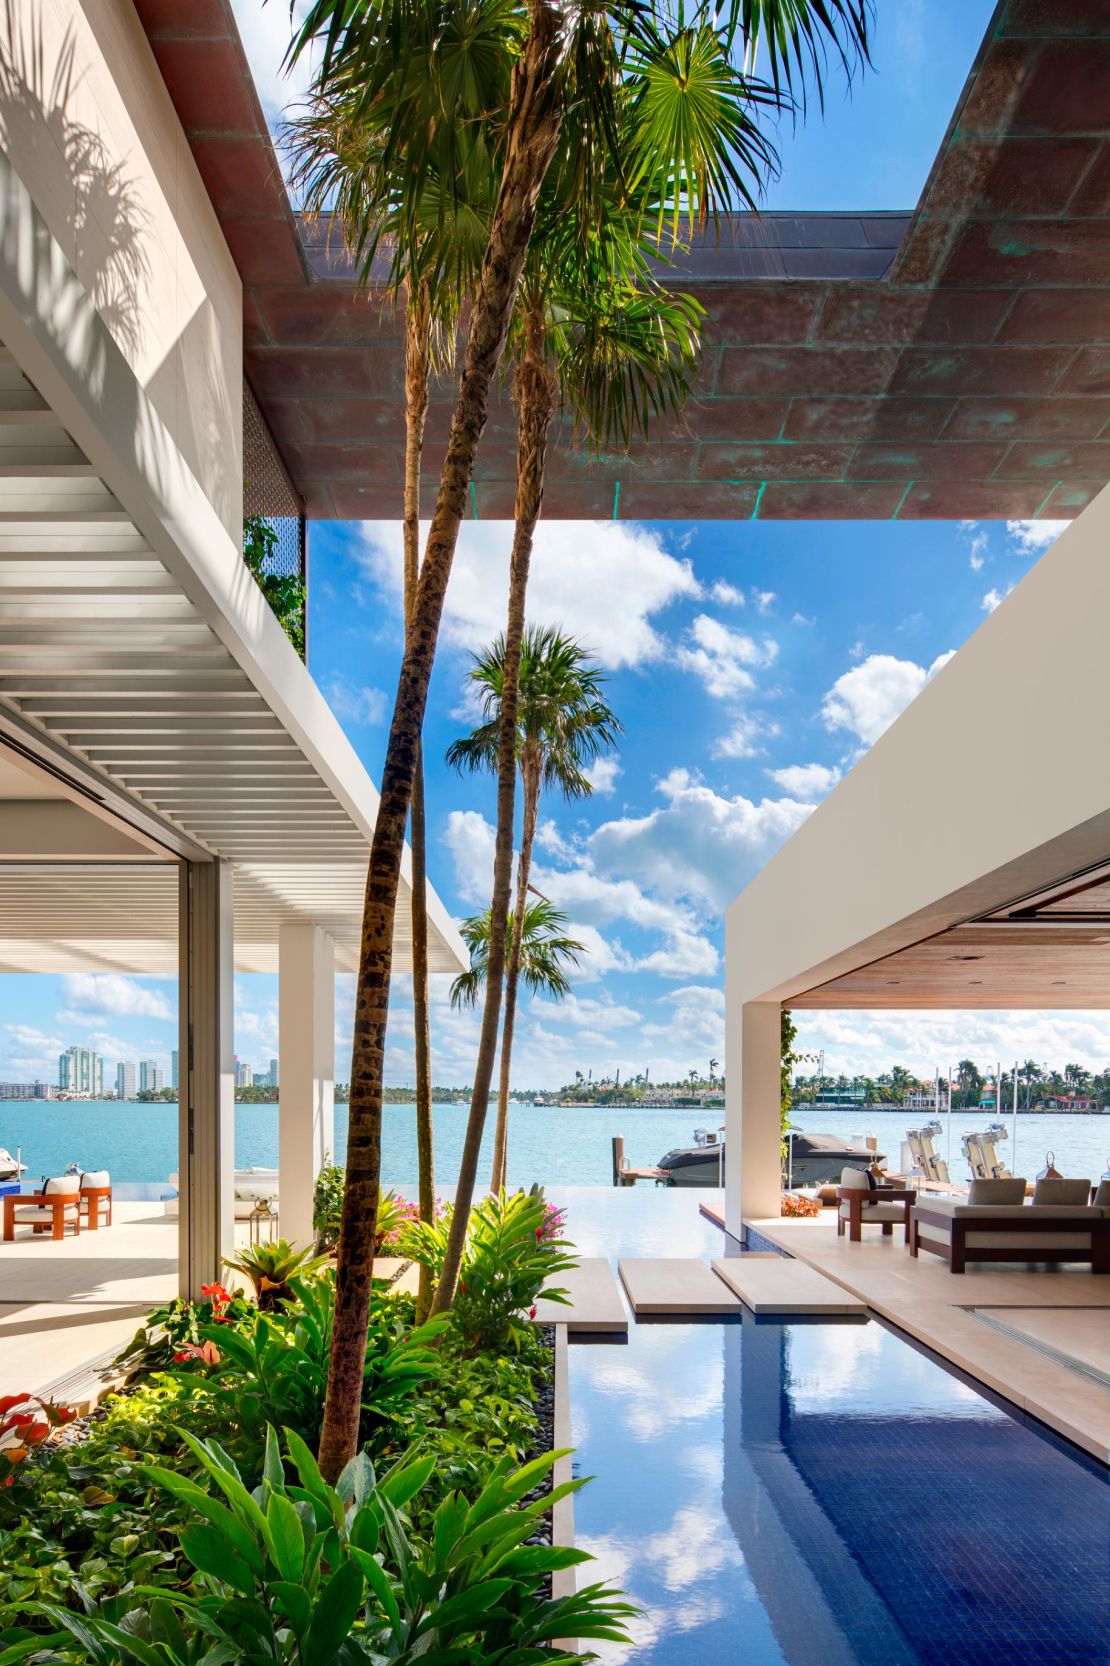 The view looking out from "Dilido," an SAOTA-designed home in Miami that was a breakthrough for the company in North America.